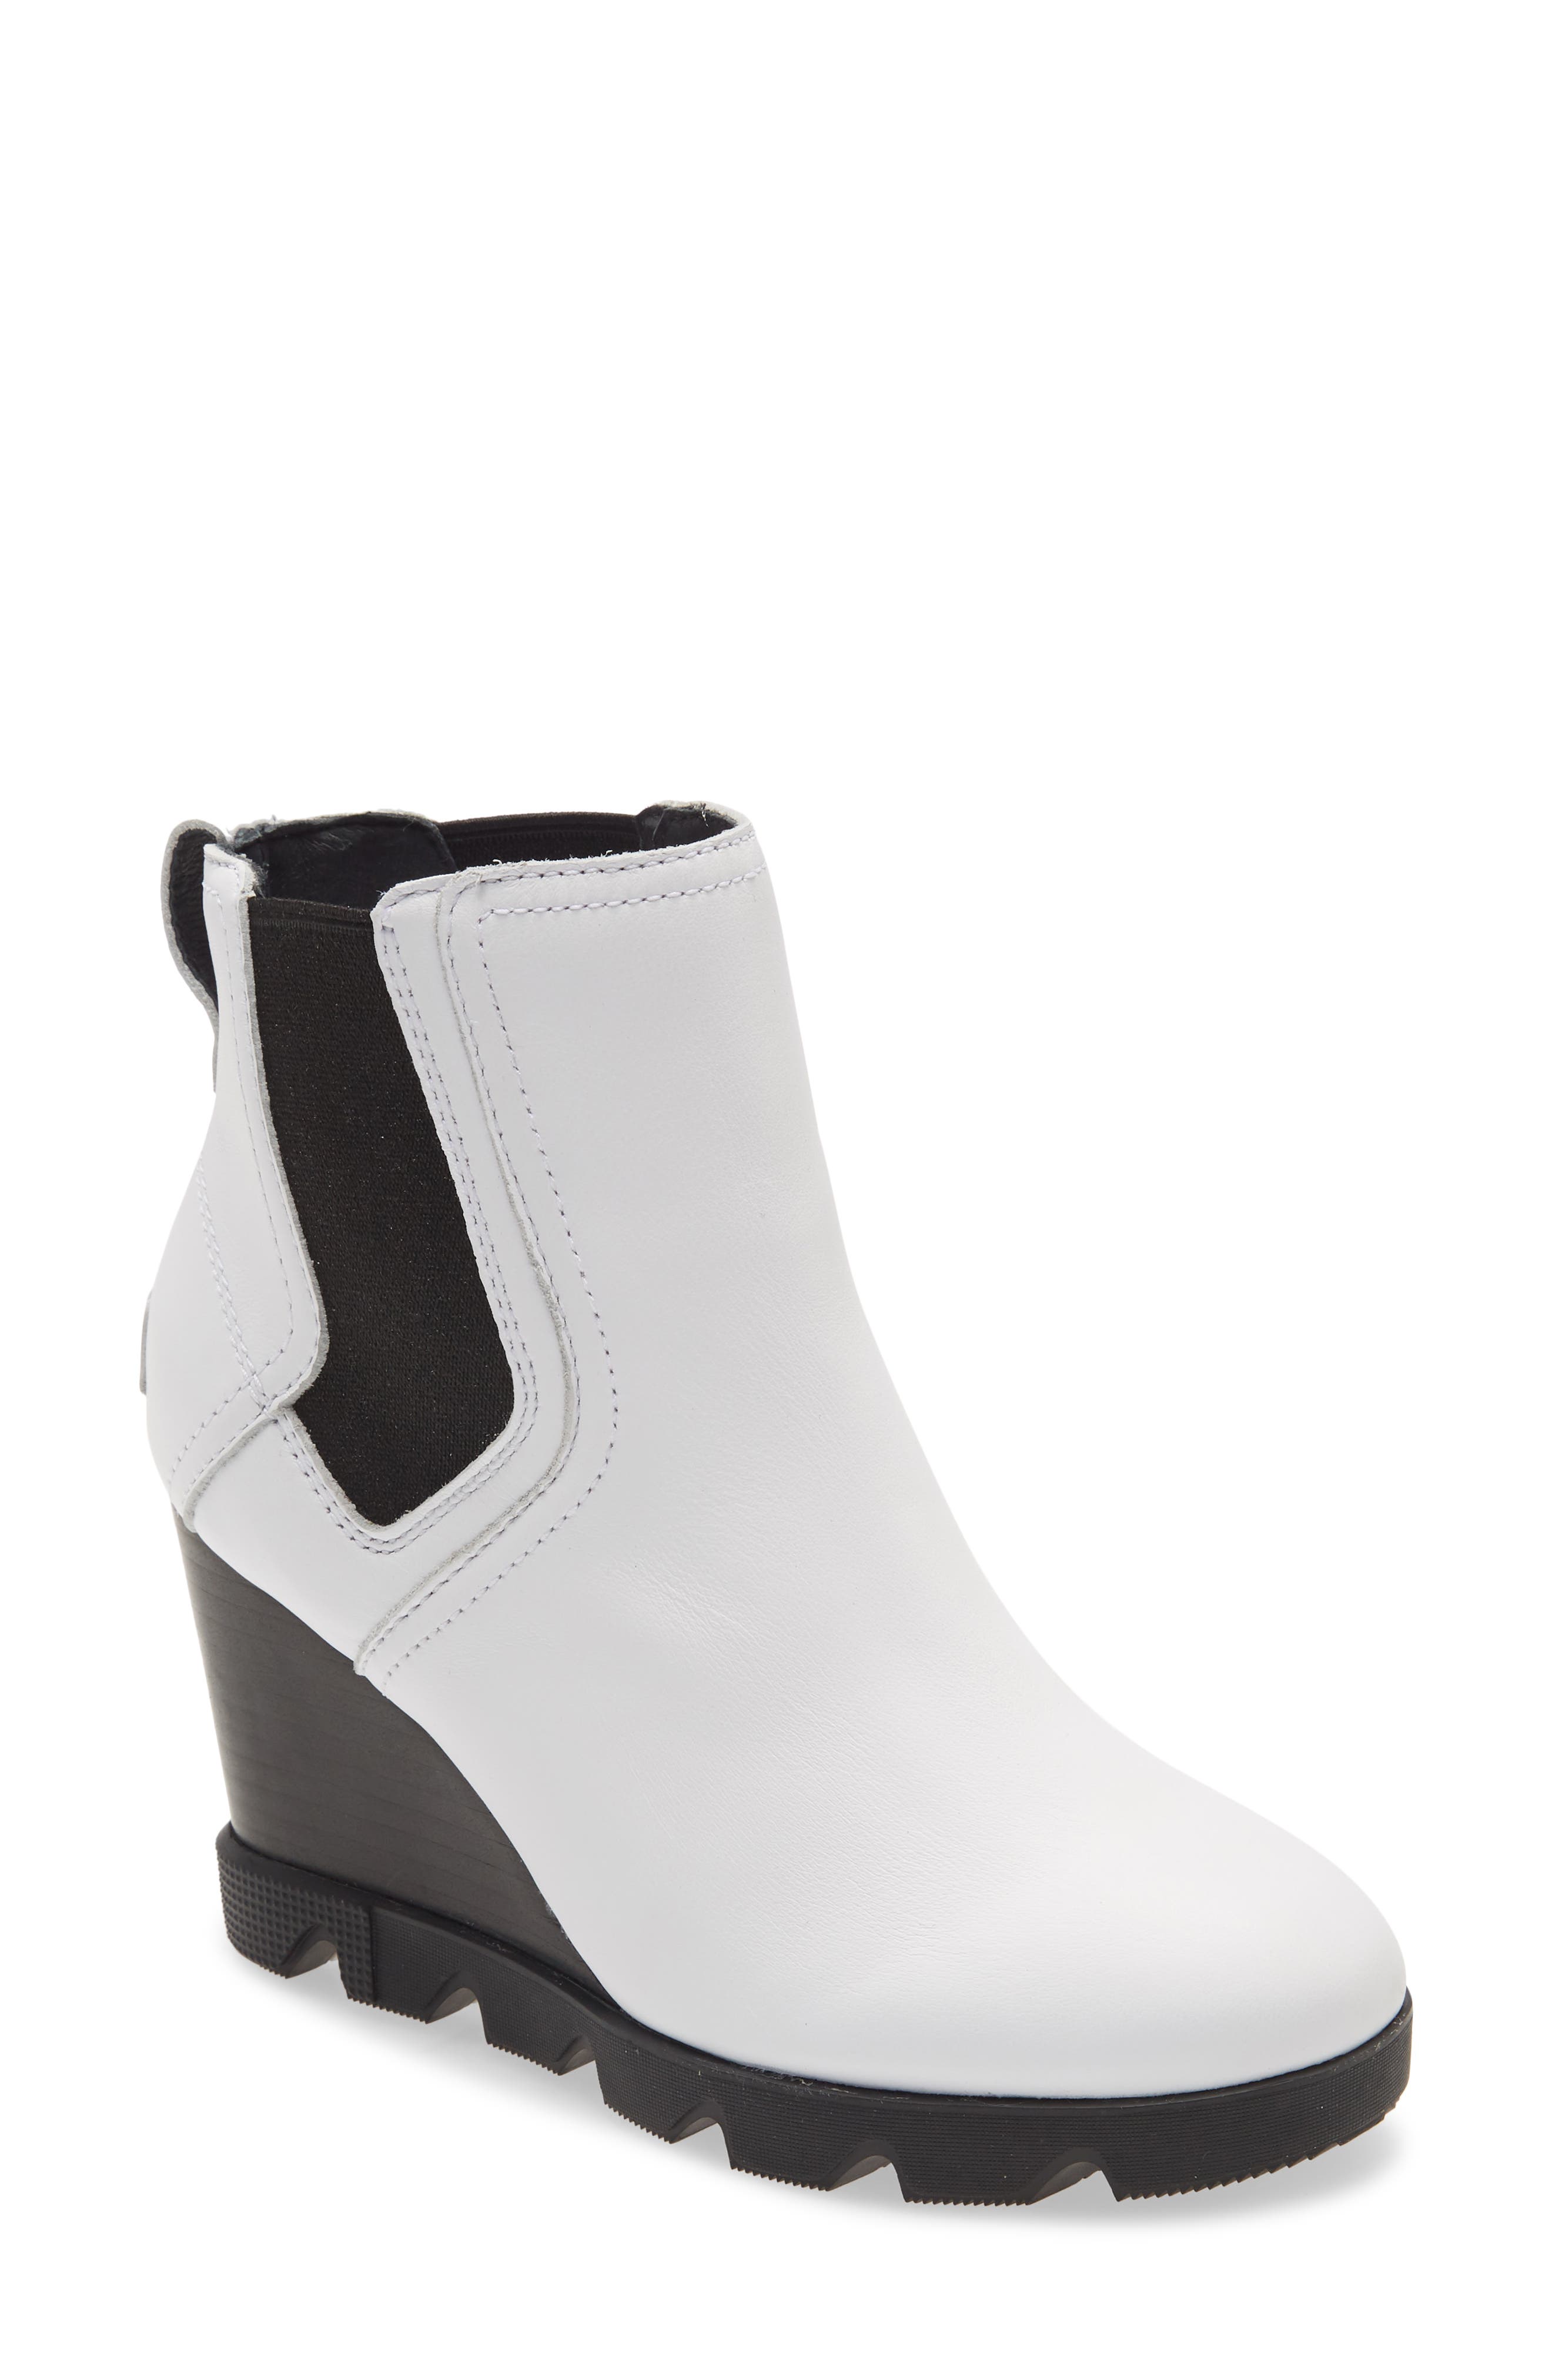 nordstrom white ankle boots